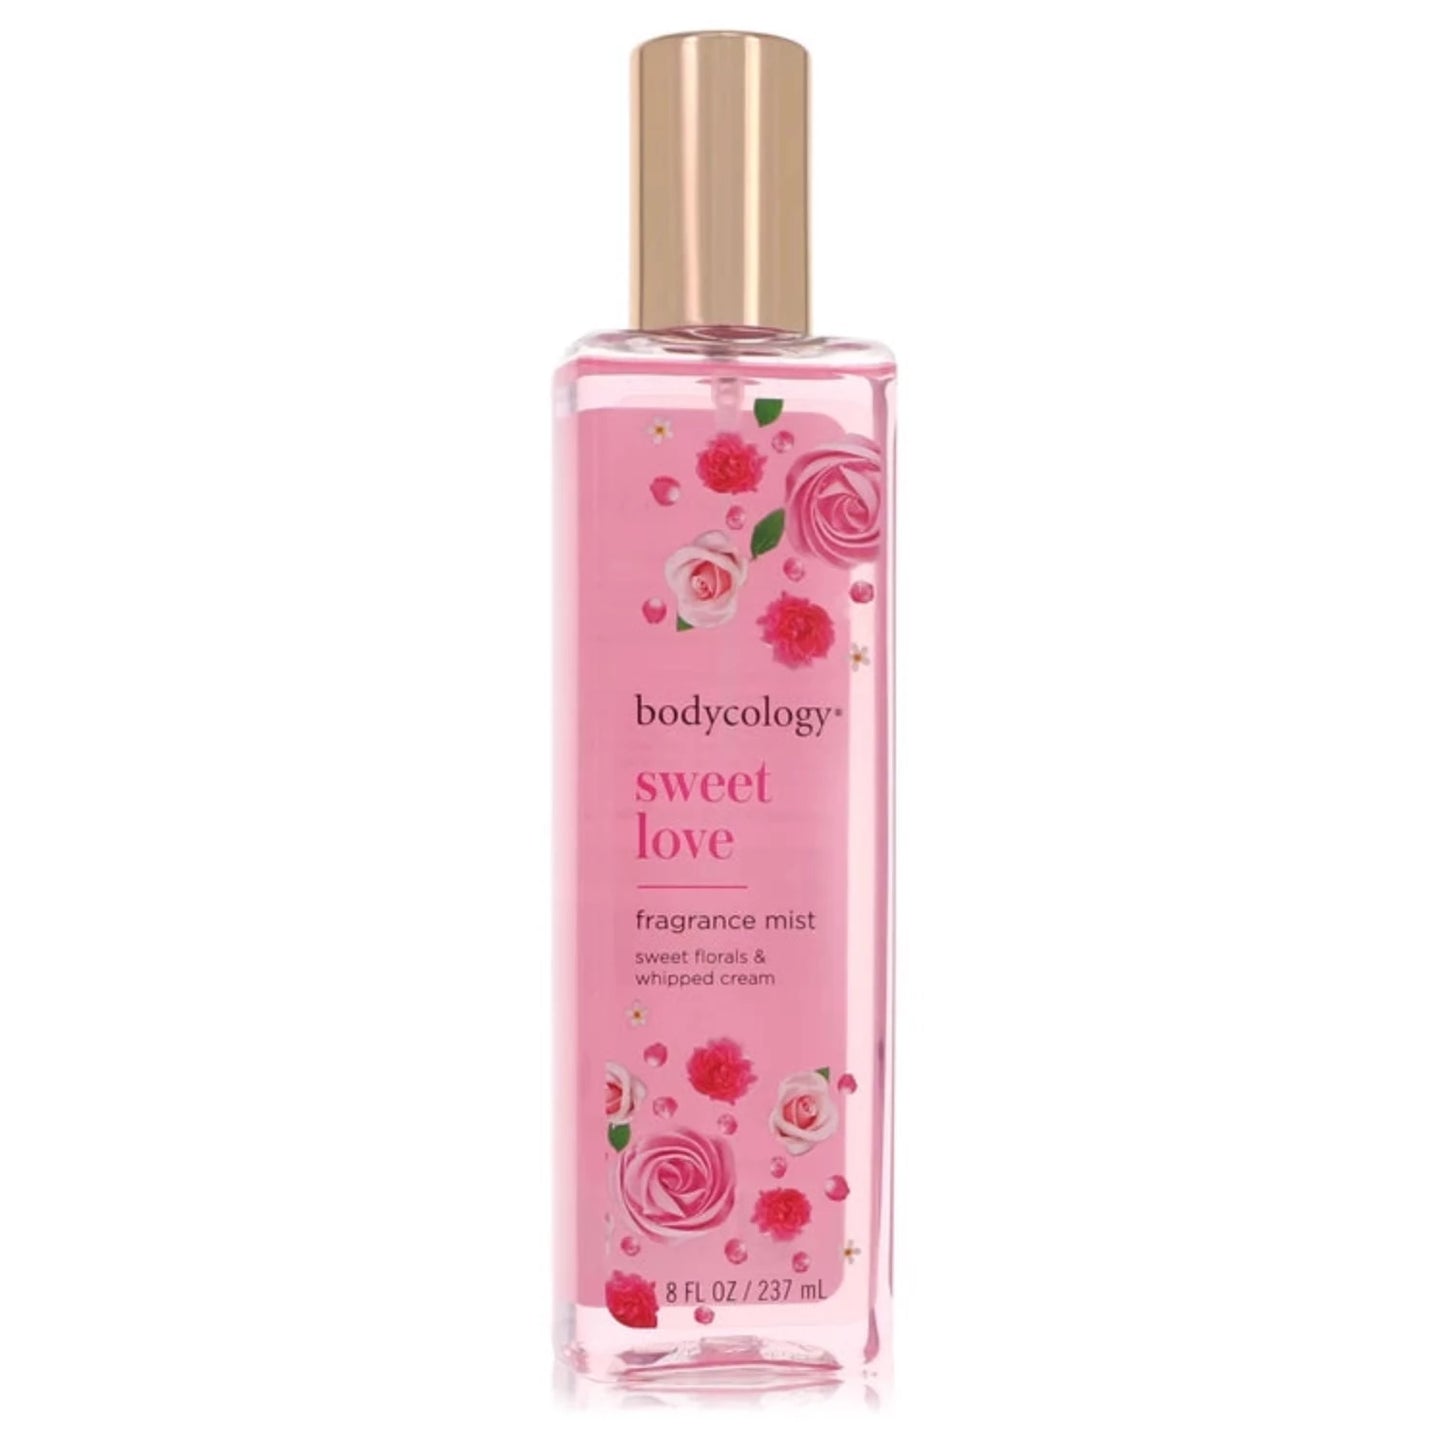 Bodycology Sweet Love Fragrance Mist Spray By Bodycology for women, Parfums De Coeur